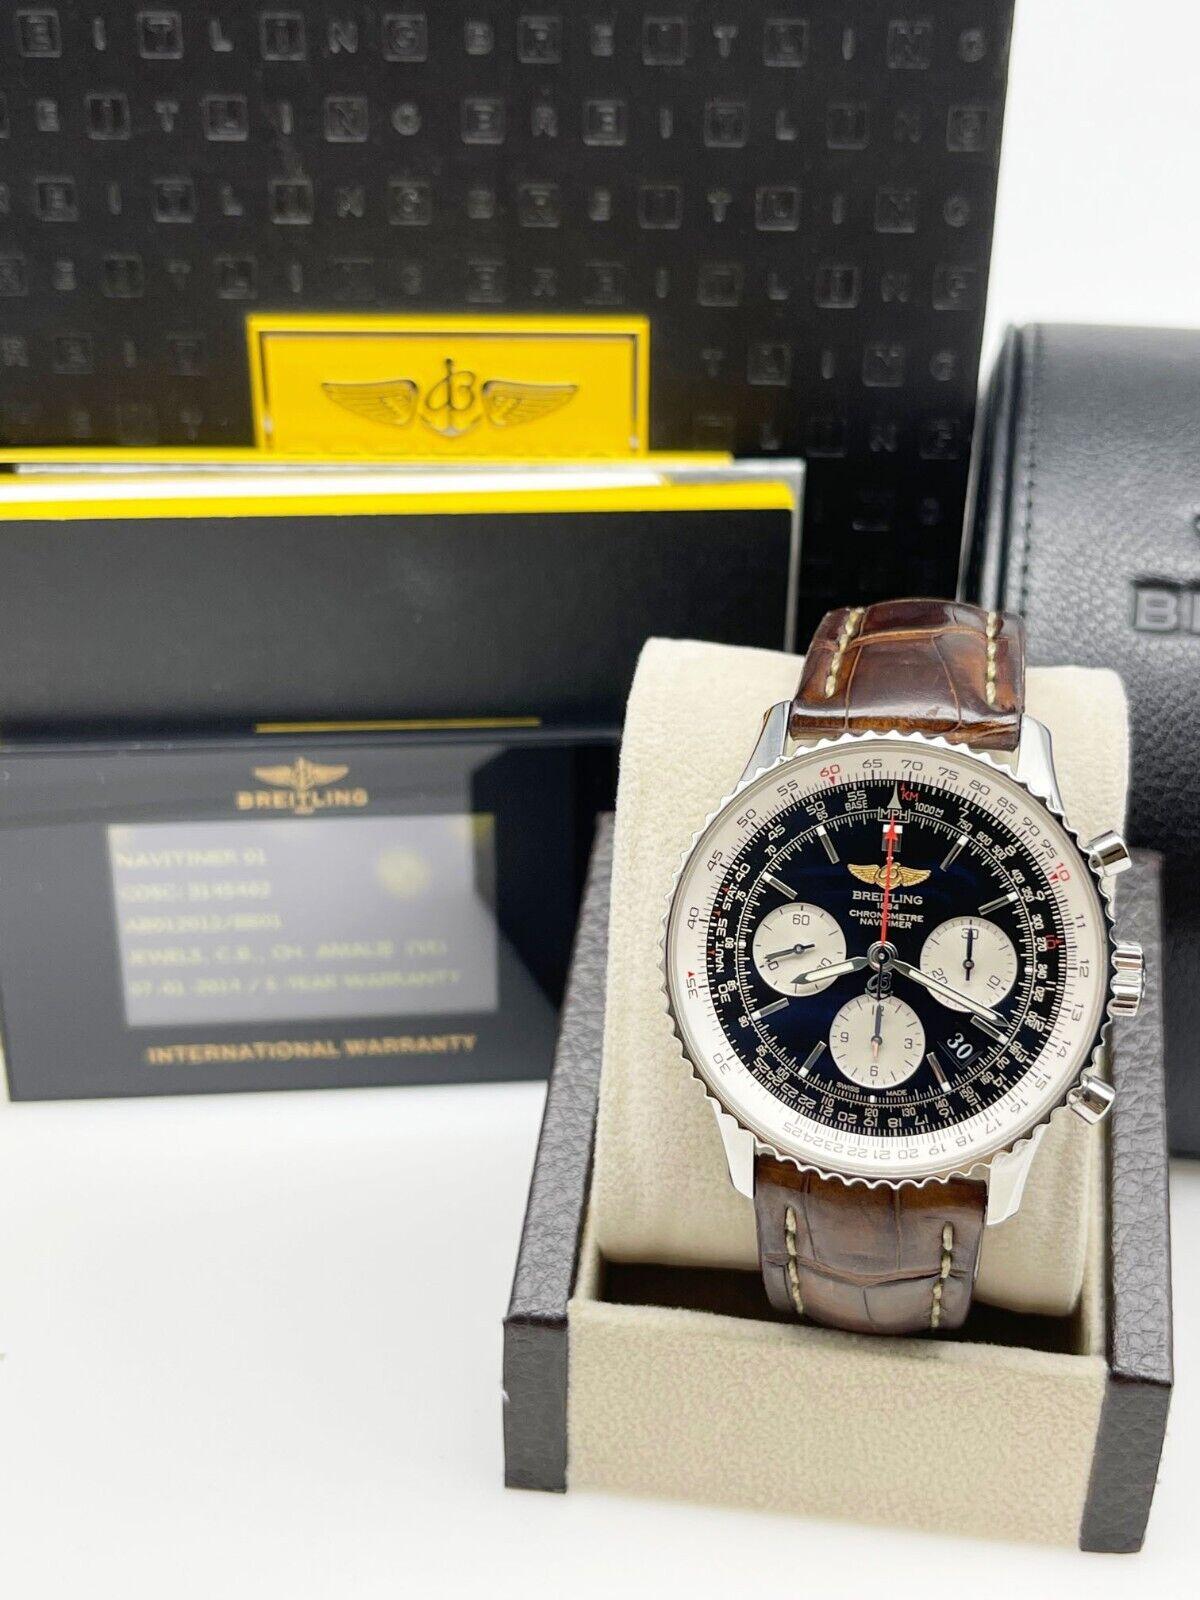 Style Number: AB0120

Year: 2014

Model: Navitimer

Case Material: Stainless Steel

Band: Brown Leather Band 

Bezel: Stainless Steel

Dial: Black

Face: Sapphire Crystal

Case Size: 43mm

Includes: 

-Breitling Box and Paper

-Certified Appraisal